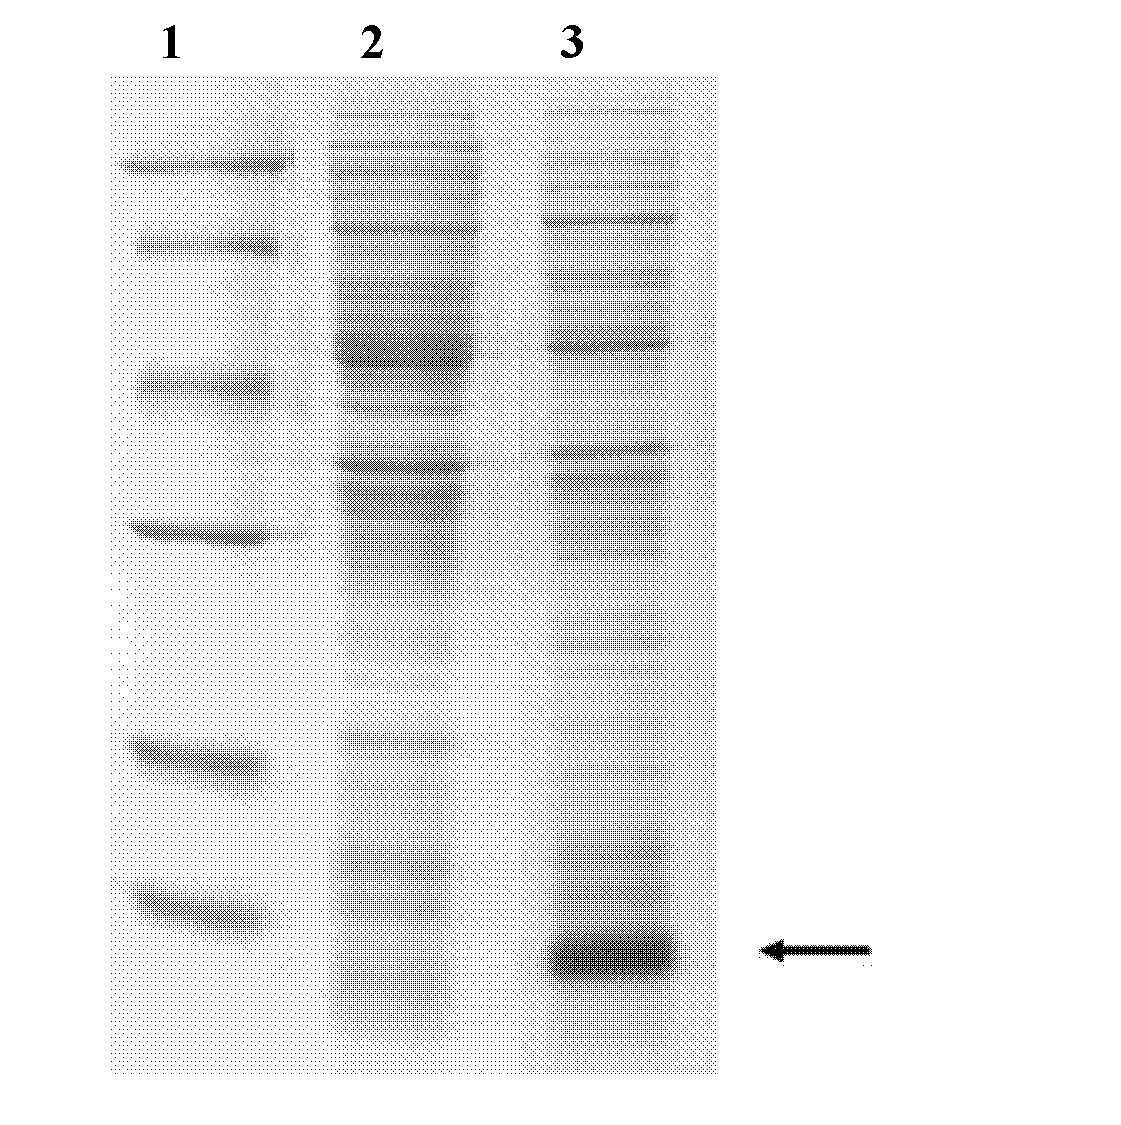 Method for preparing recombinant human IgE receptor protein and application of recombinant human IgE receptor protein